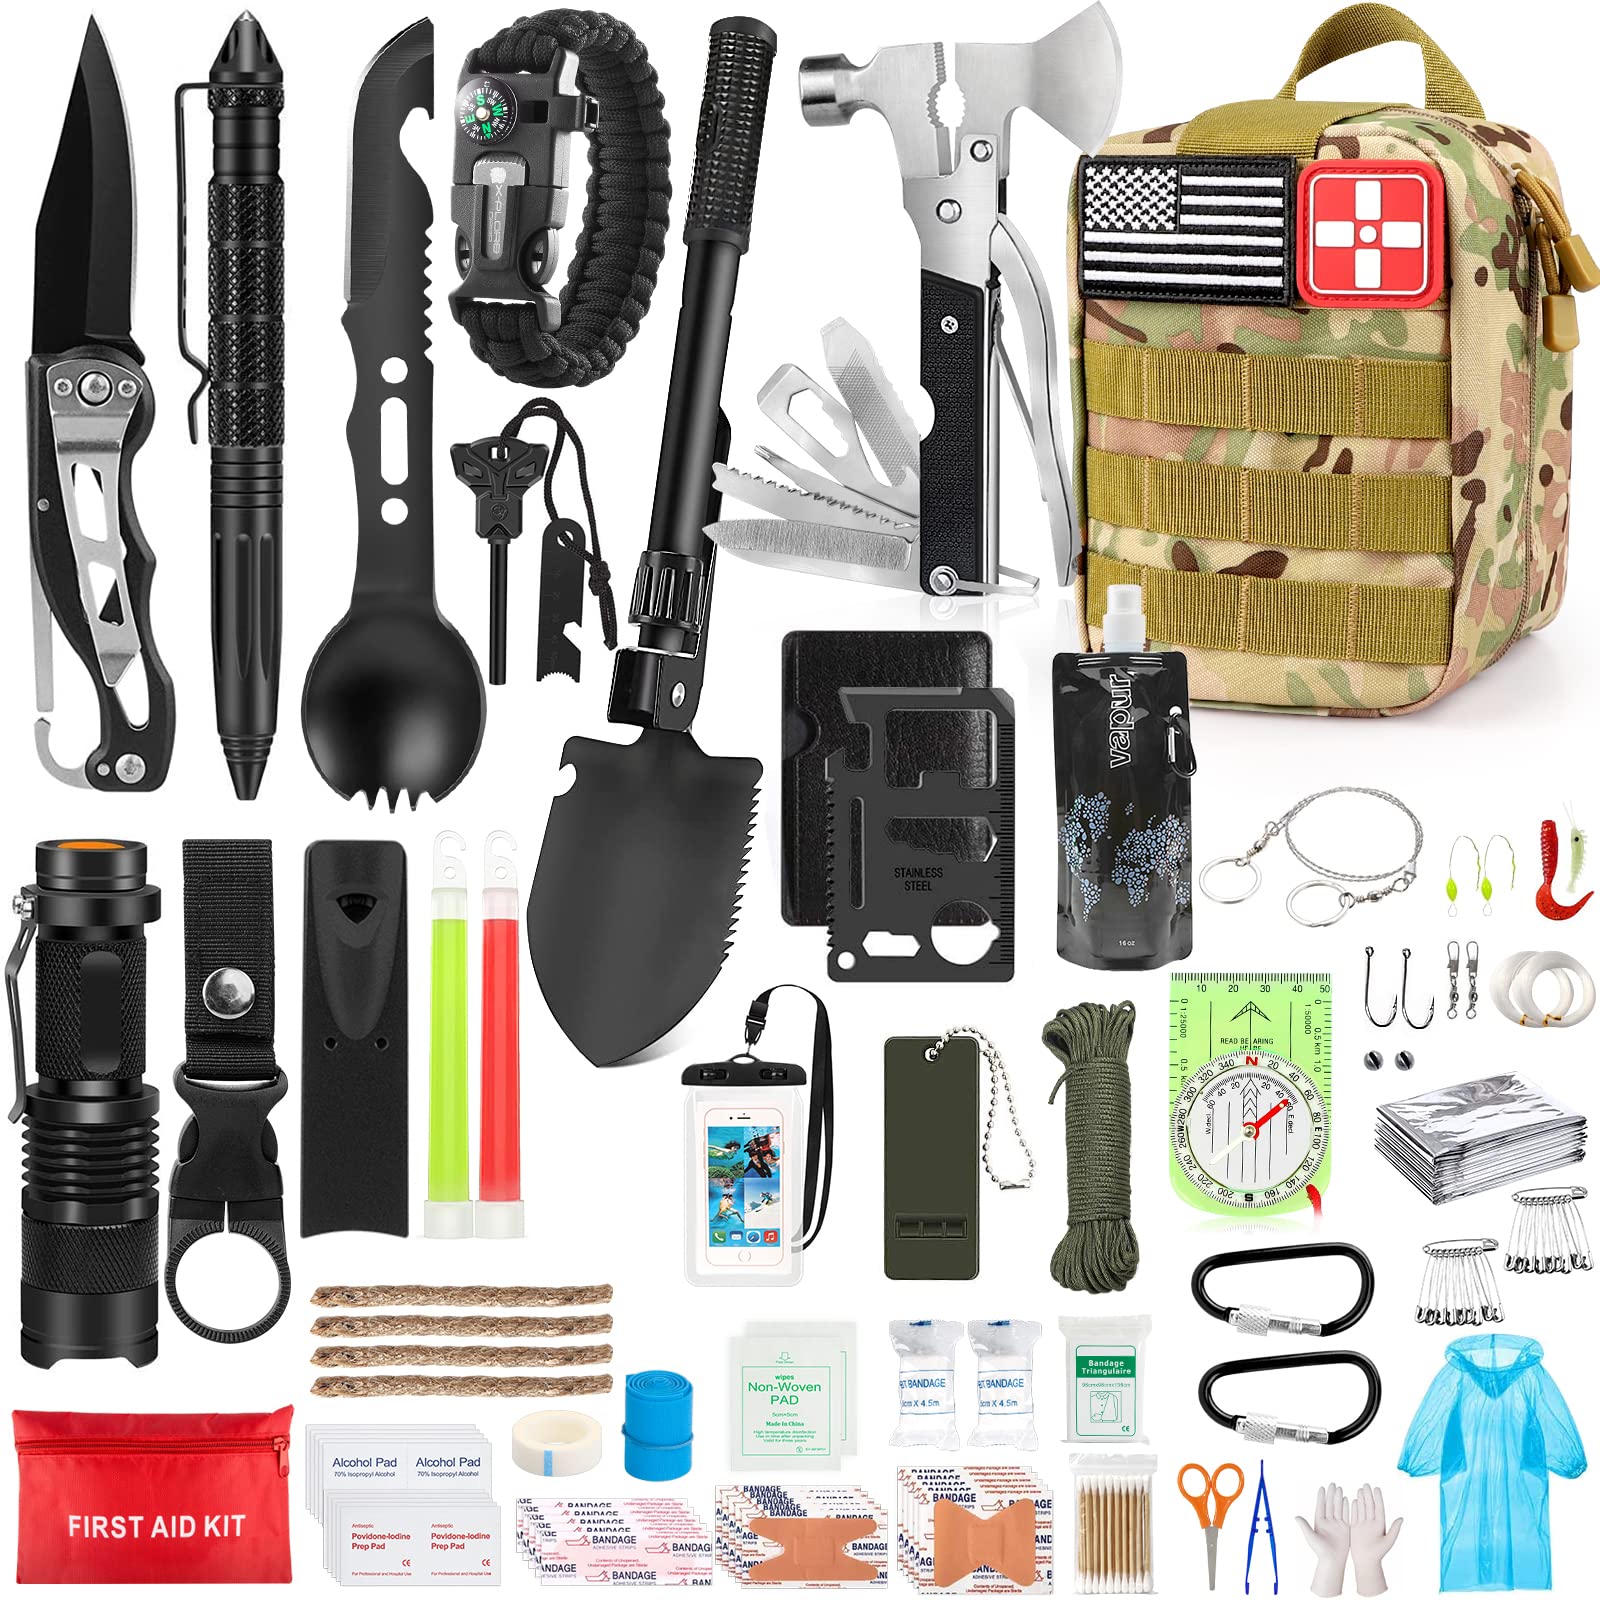 Puhibuox Emergency Survival Kit, 35 in 1 Survival Gear Kit Gift for Men  Him, Tactical Defense Equitment Tool for Camping, Hiking, Hunting,  Adventure Accessories - Ultra Pickleball